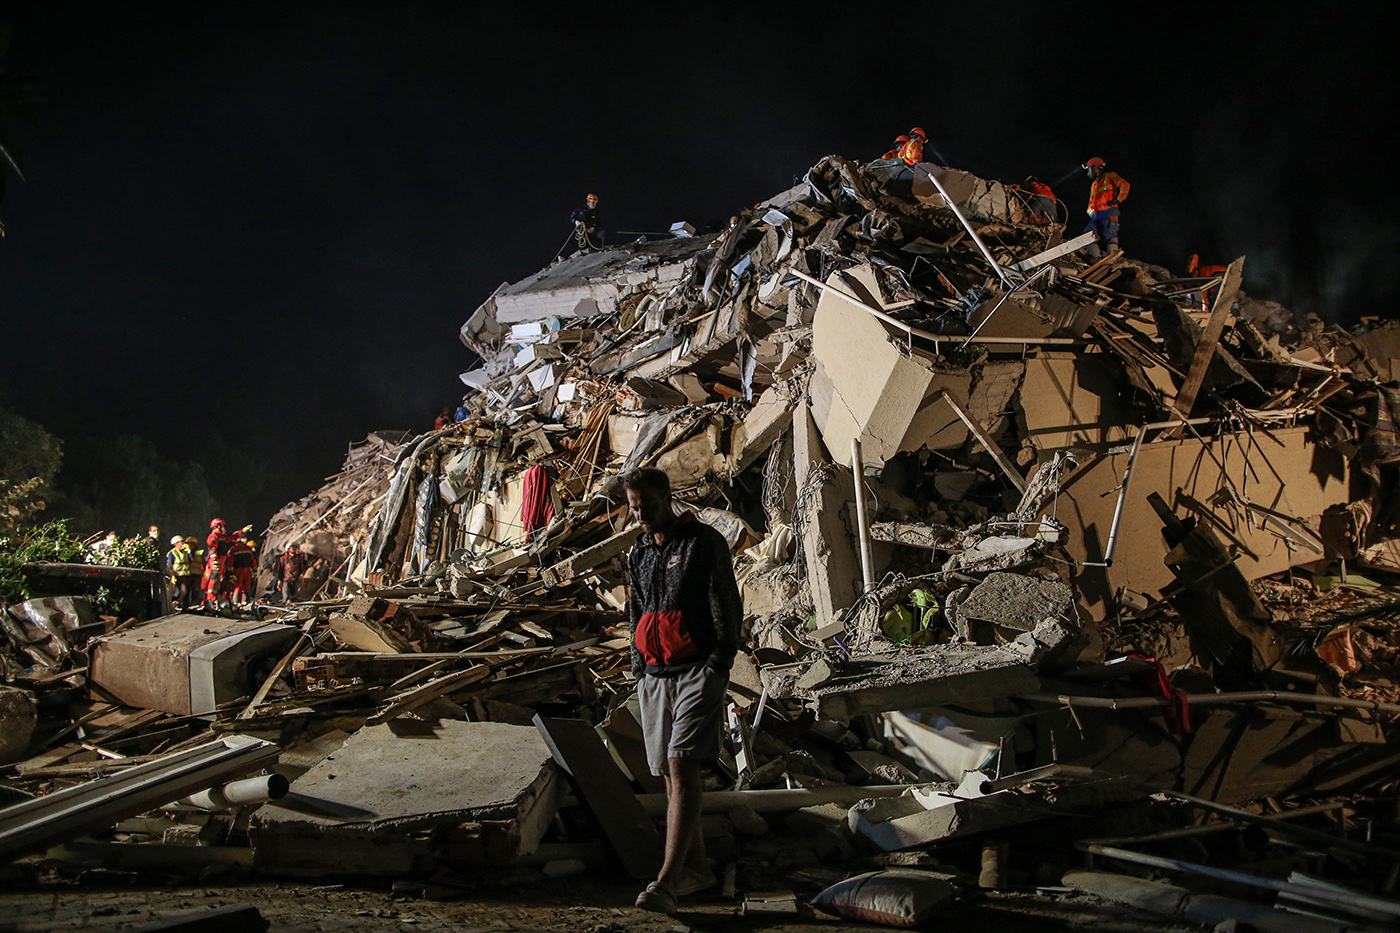 Rescue workers and people search for survivors at a collapsed building after a 7.0 magnitude earthquake in the Aegean Sea, at Bayrakli district in Izmir, Turkey, 31 October 2020. According to Turkish media reports, at least twenty people died while more than eight  hundreds were injured and dozens of buildings were destroyed in the earthquake.